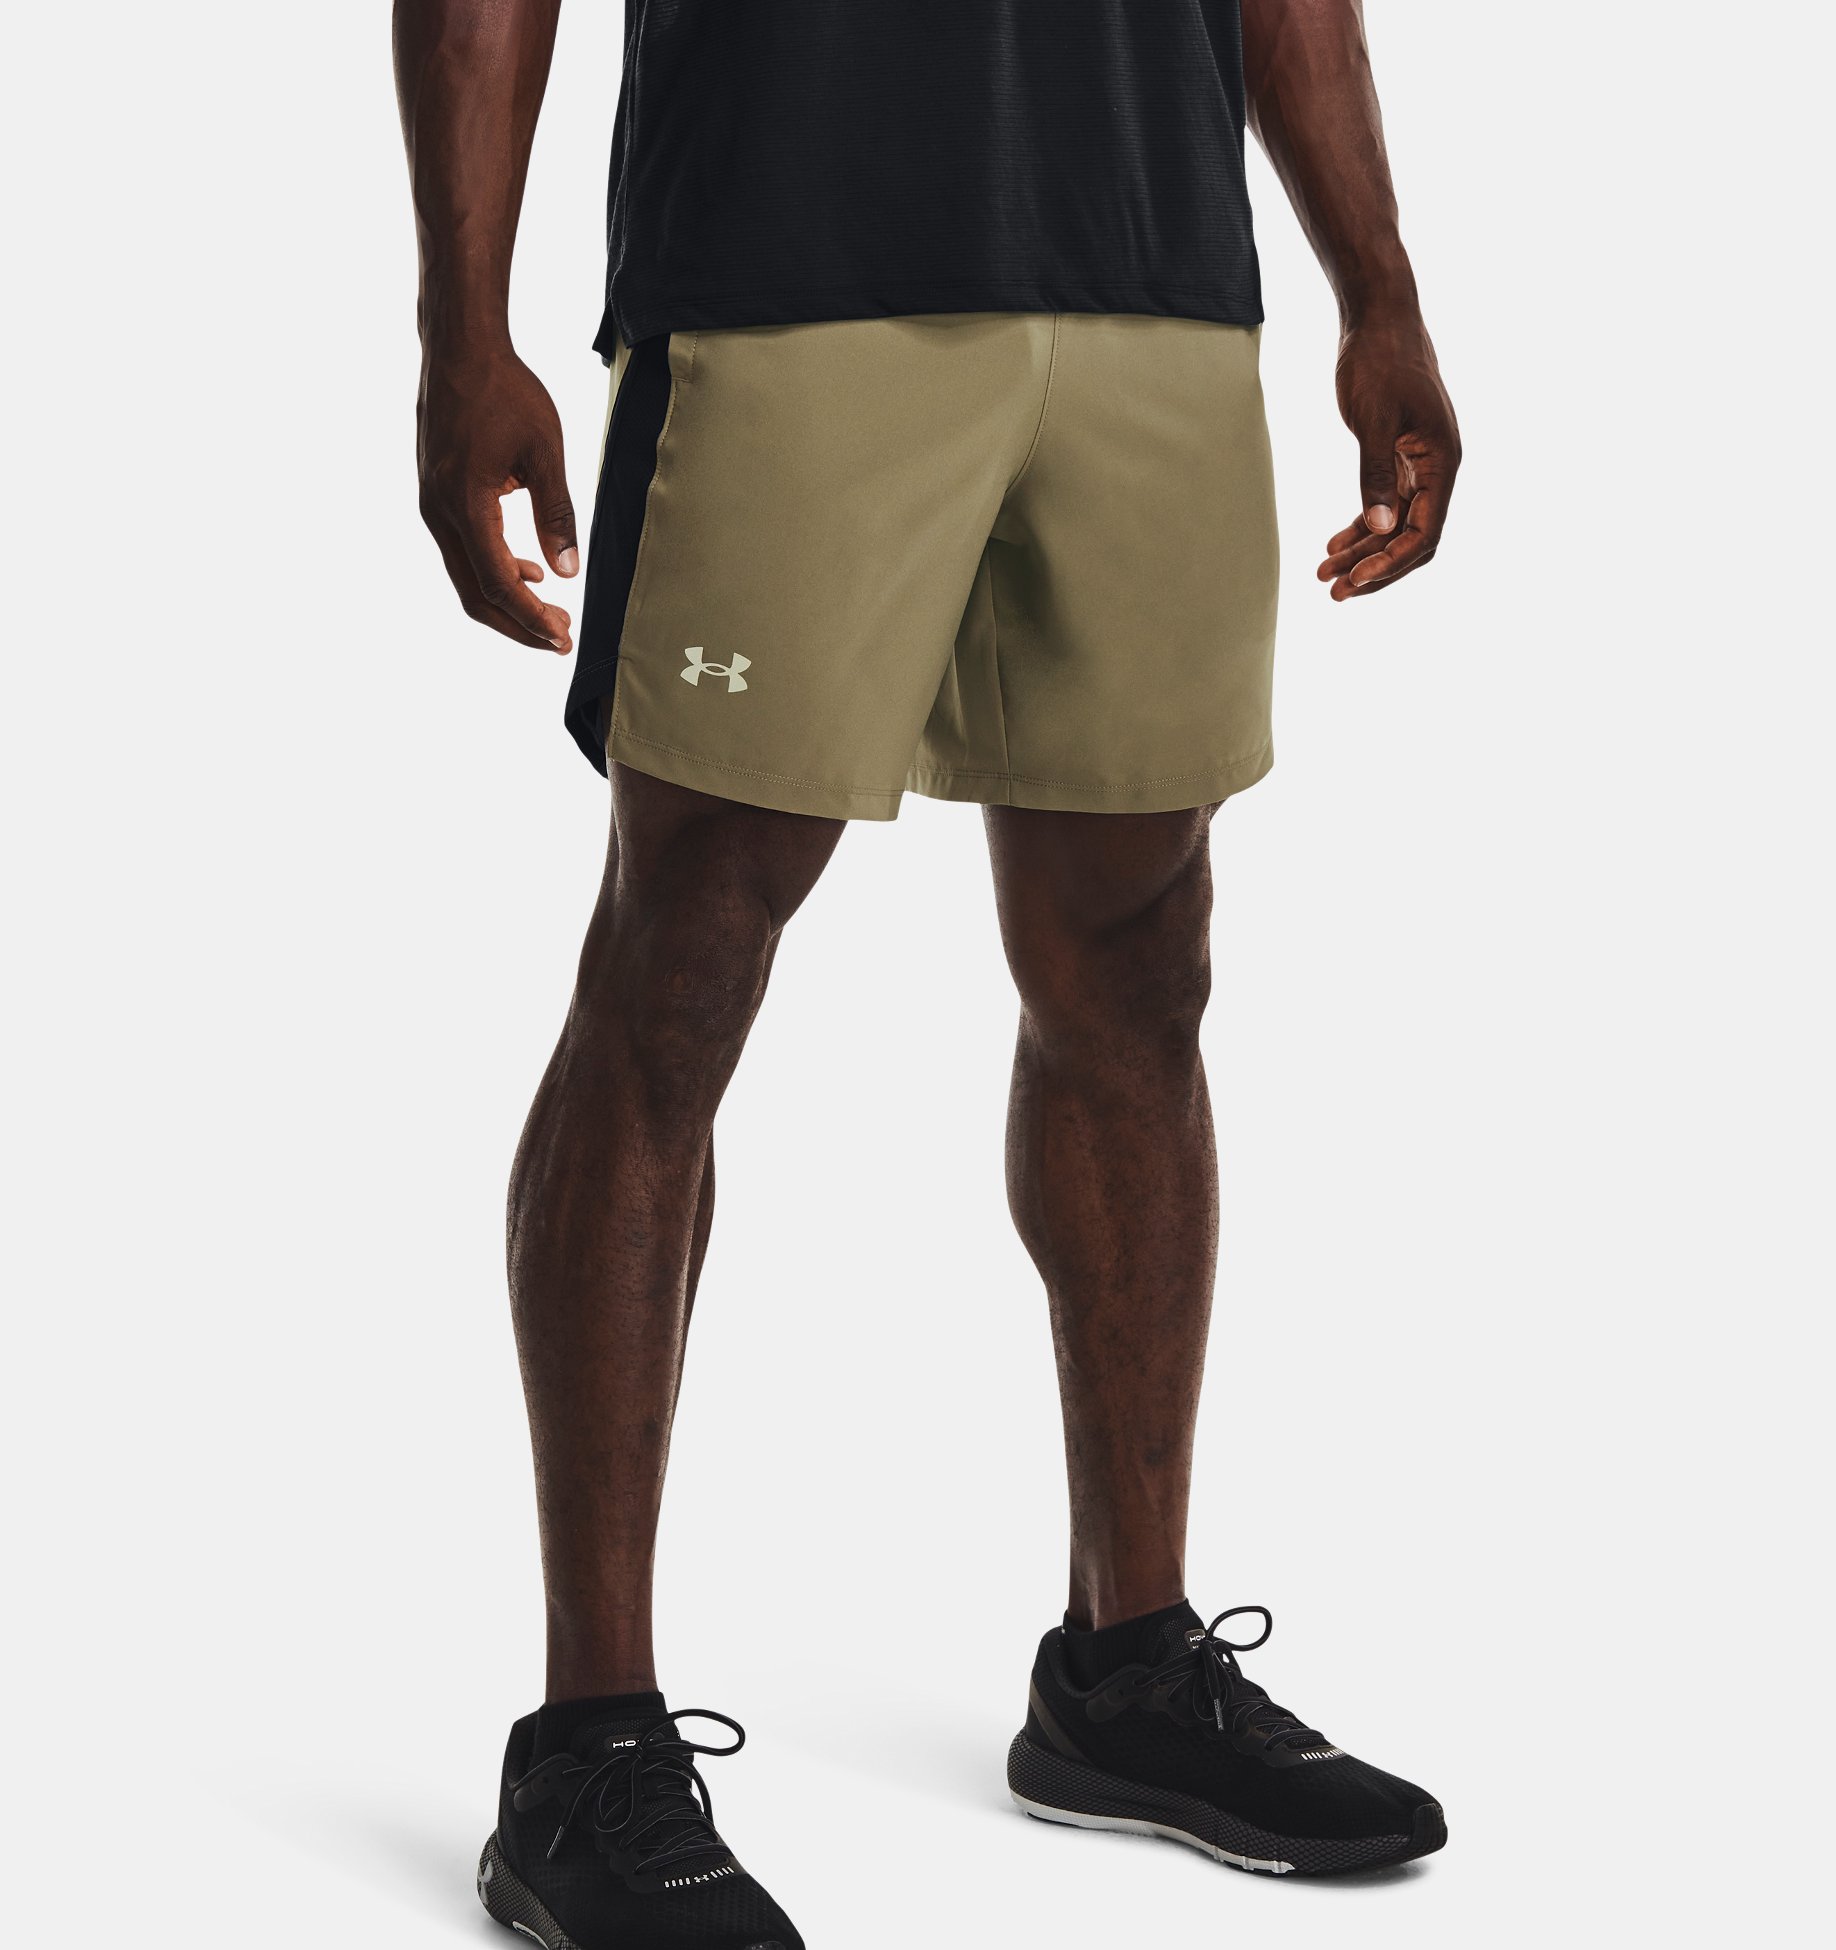 Under Armour Launch SW 7 Inch Printed Mens Running Shorts Green 